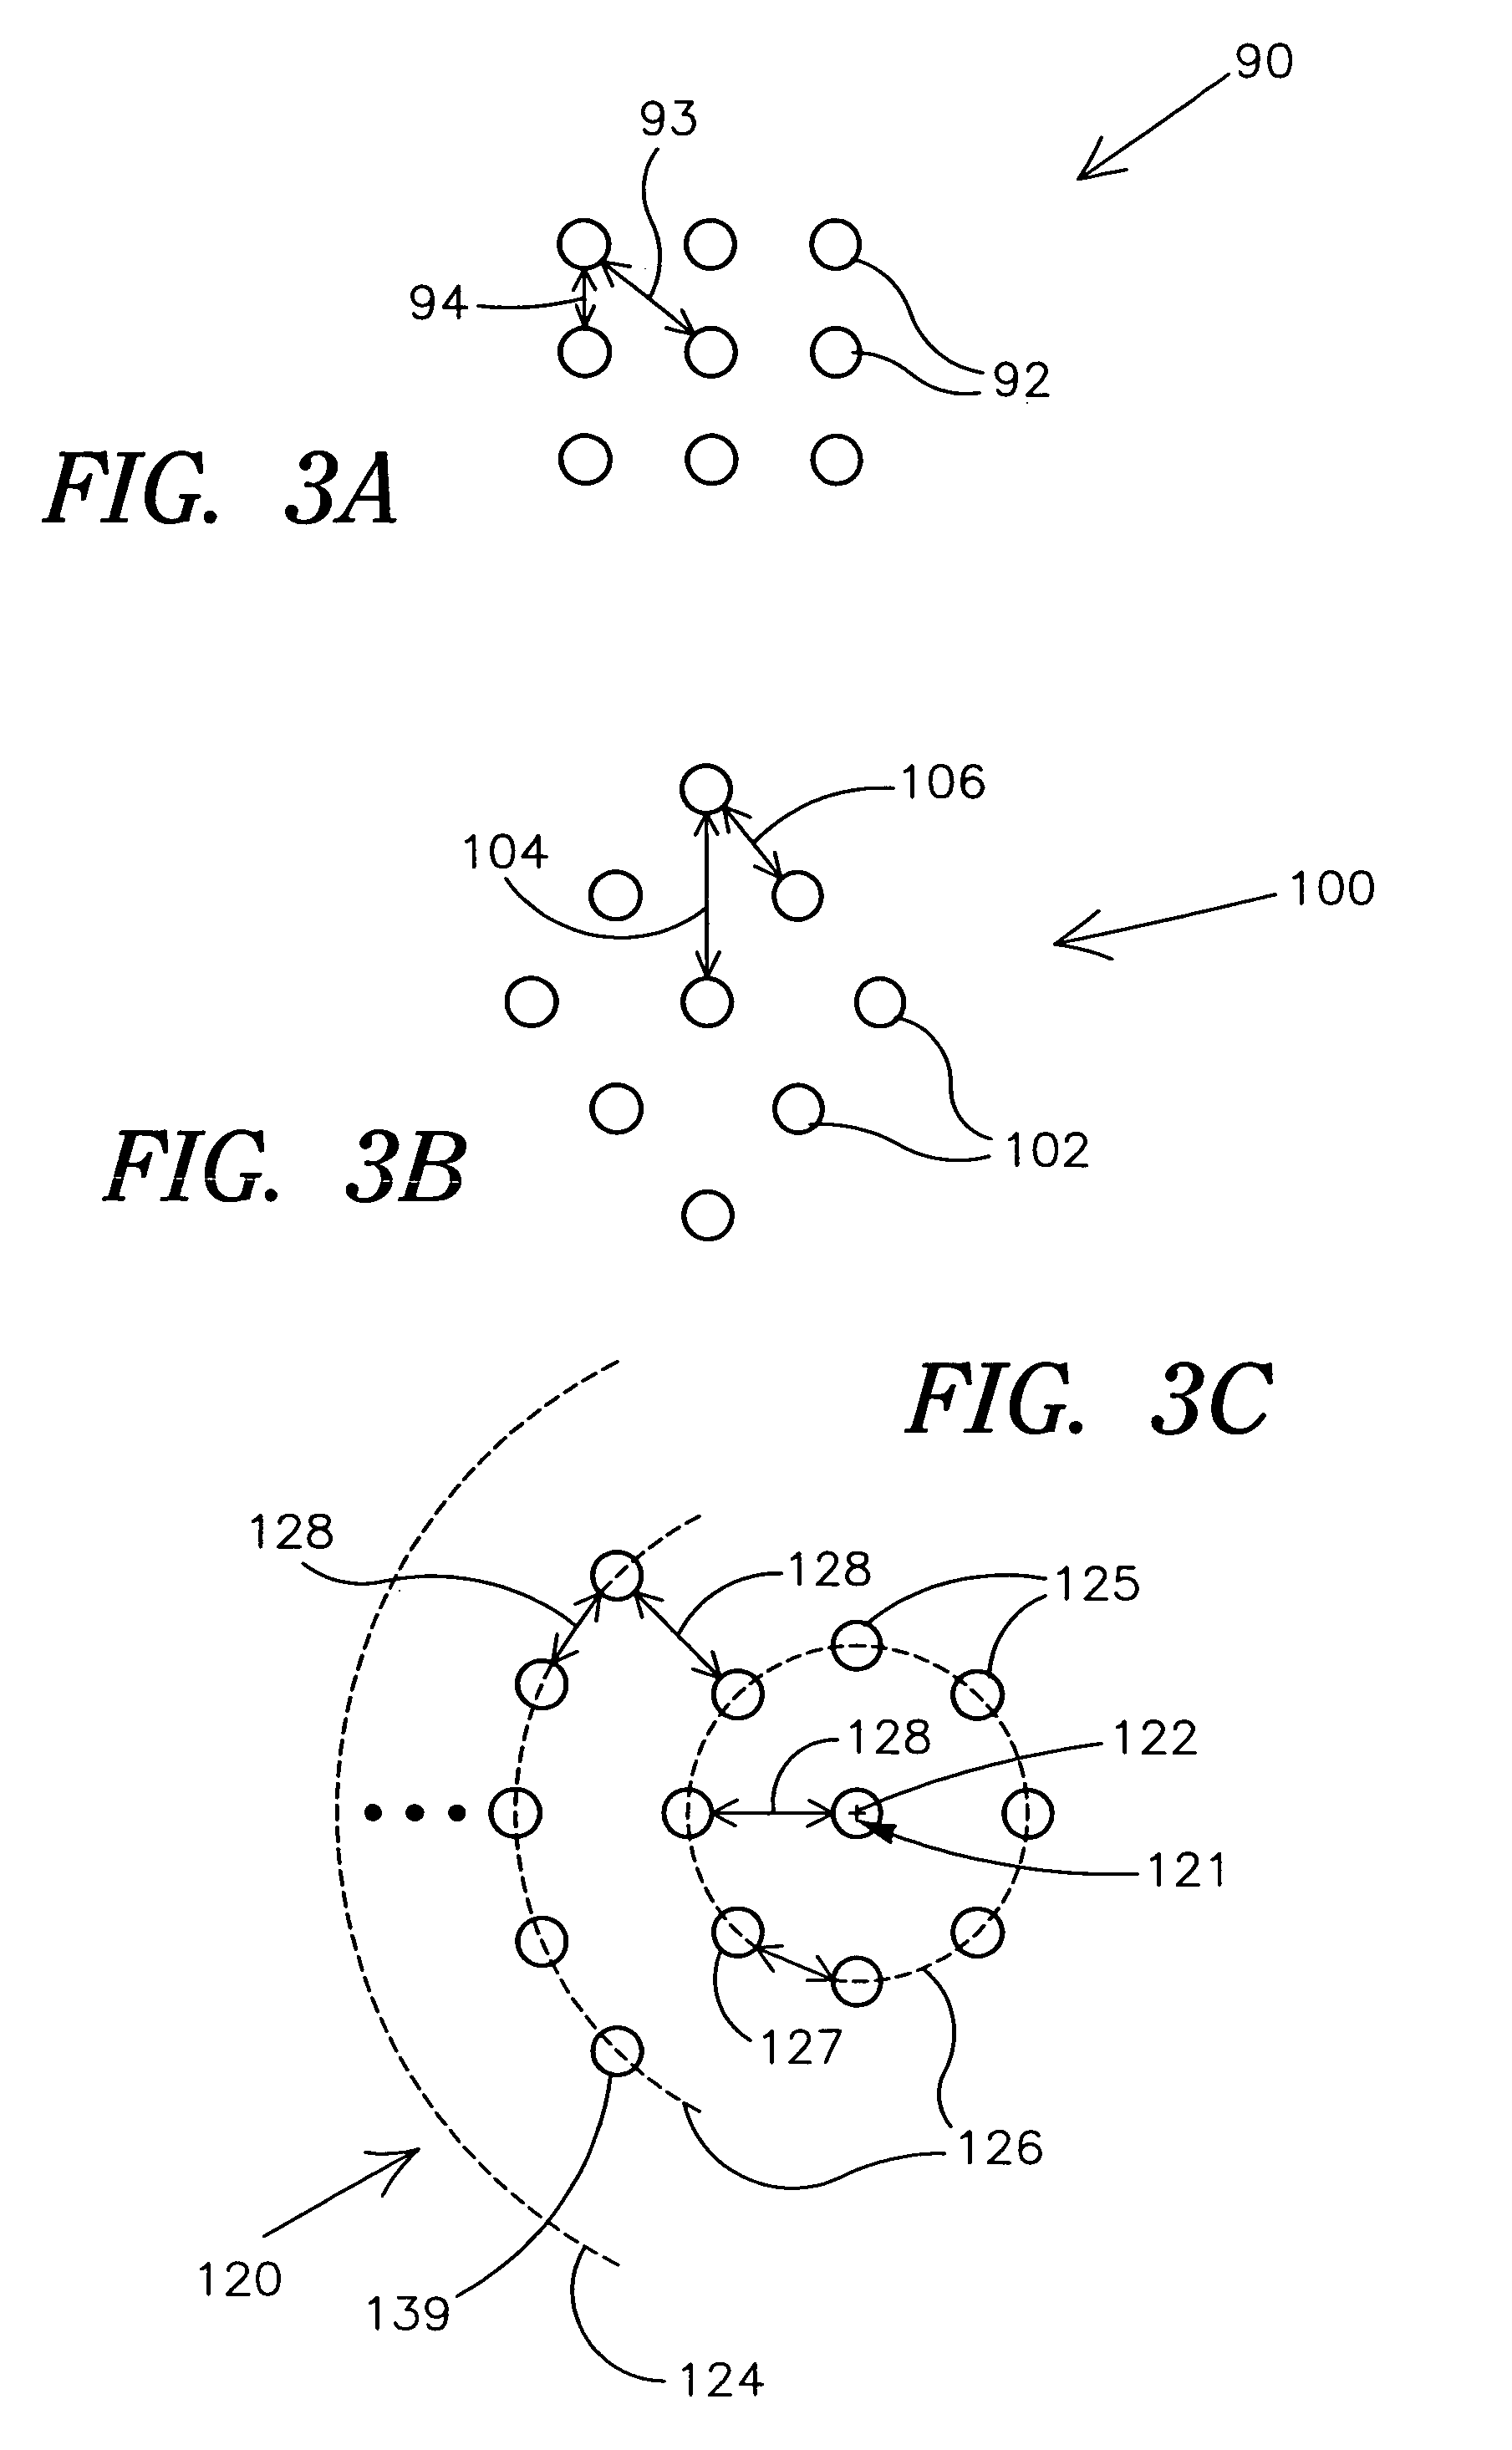 High mass throughput particle generation using multiple nozzle spraying